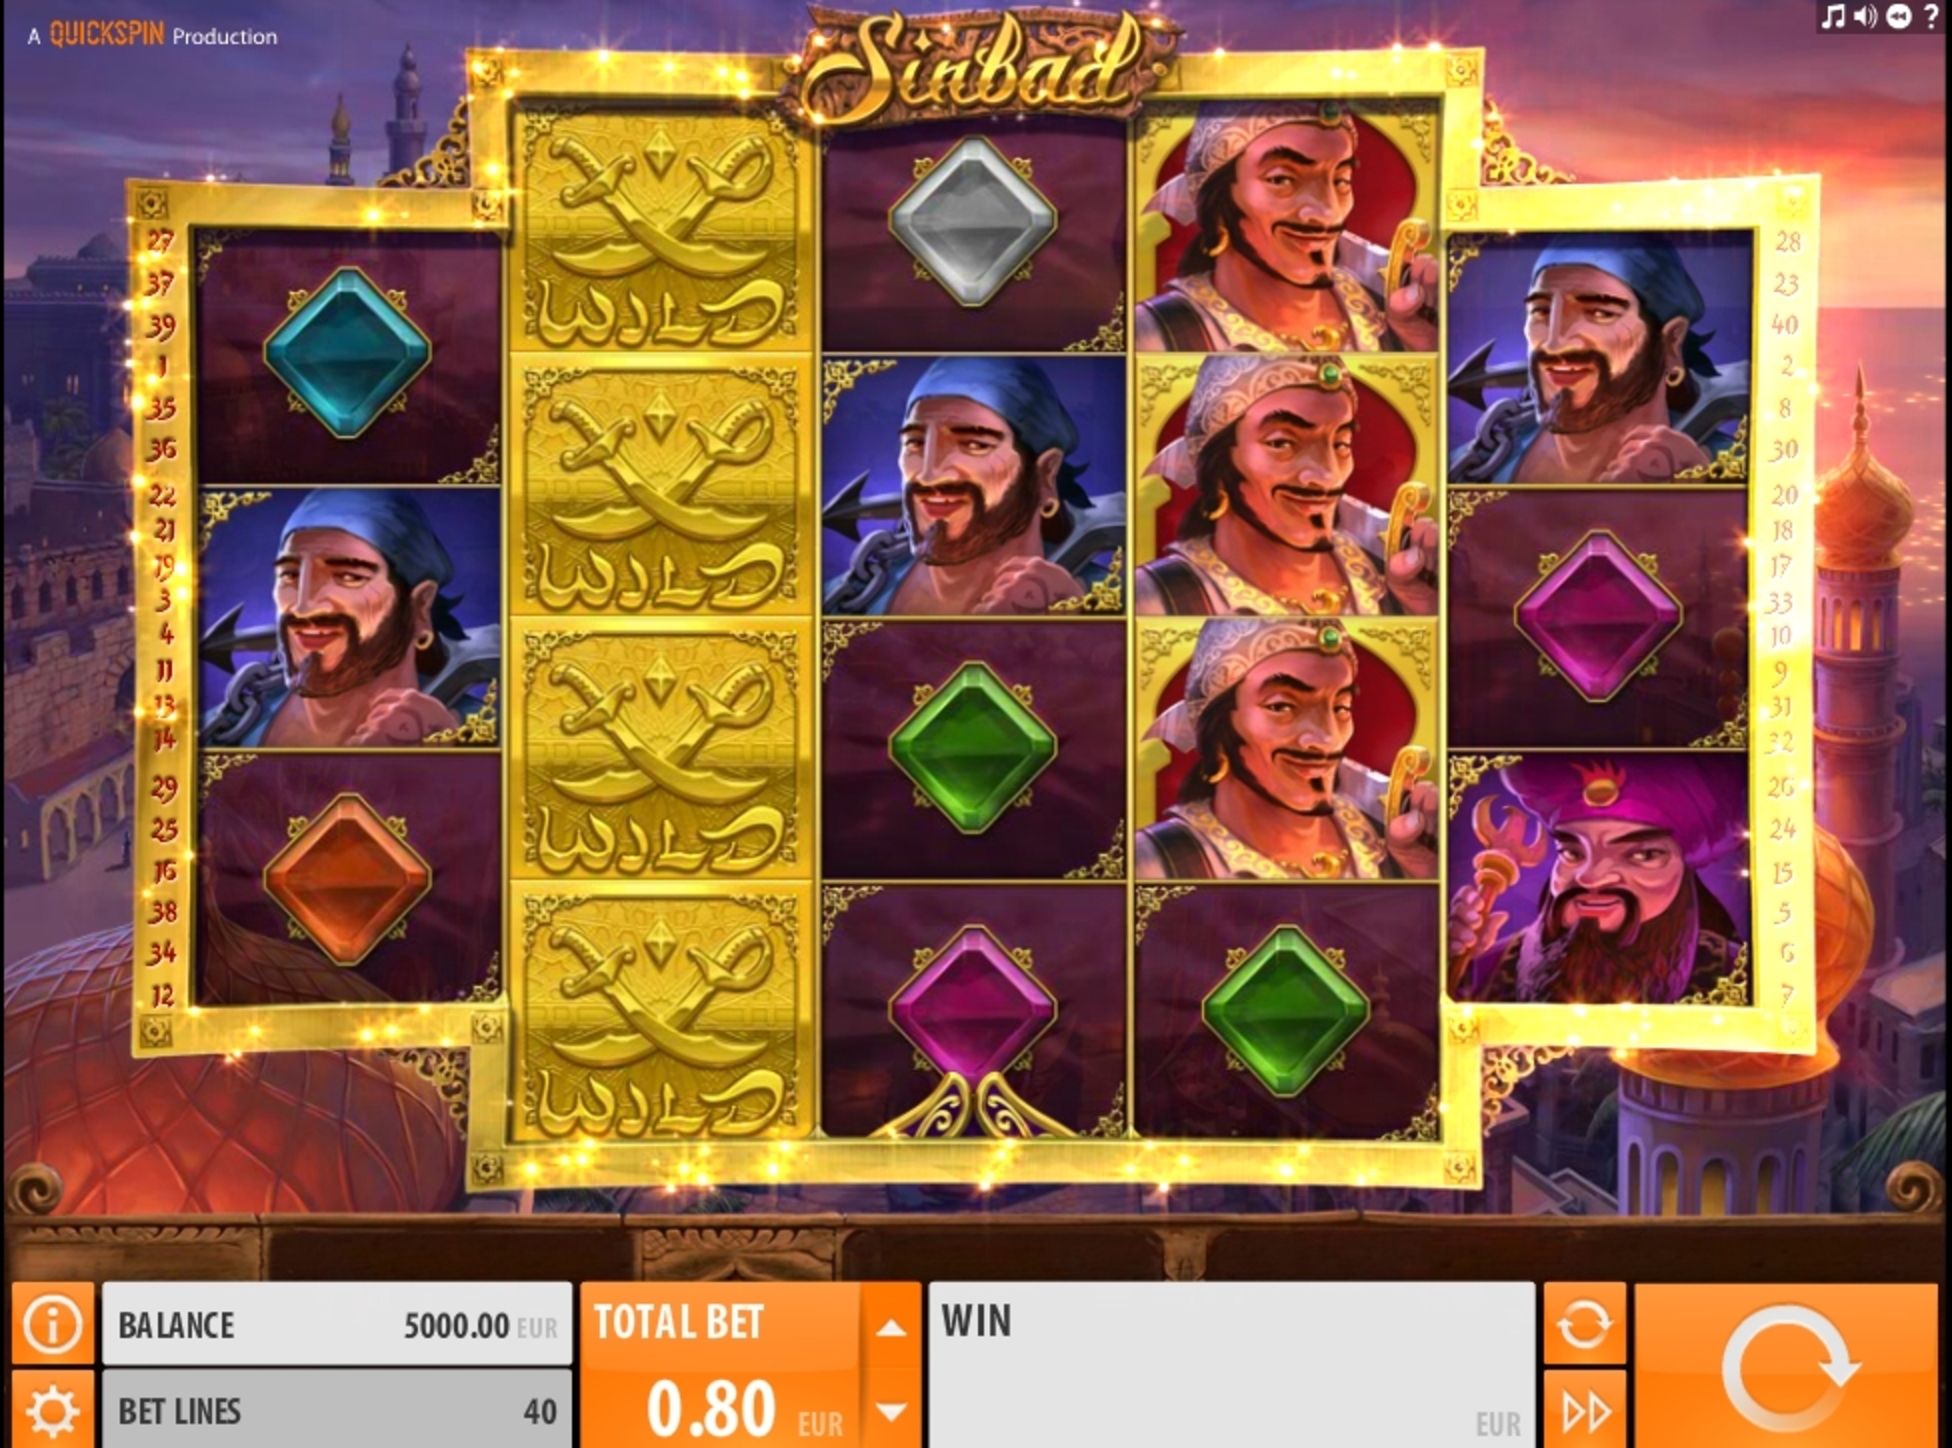 Reels in Sinbad Slot Game by Quickspin